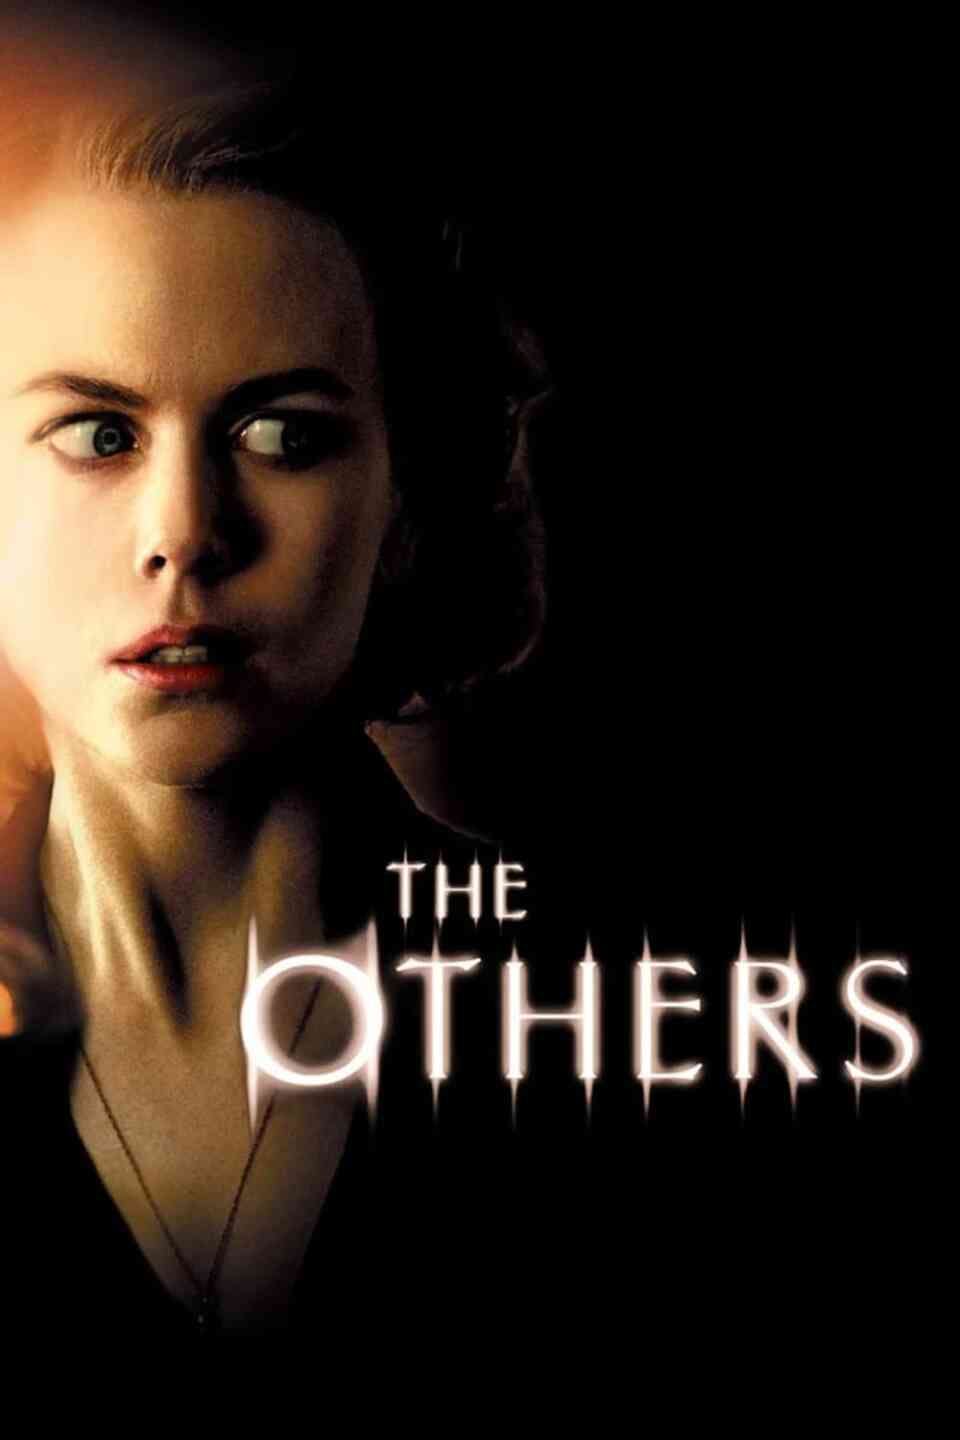 Read The Others screenplay (poster)